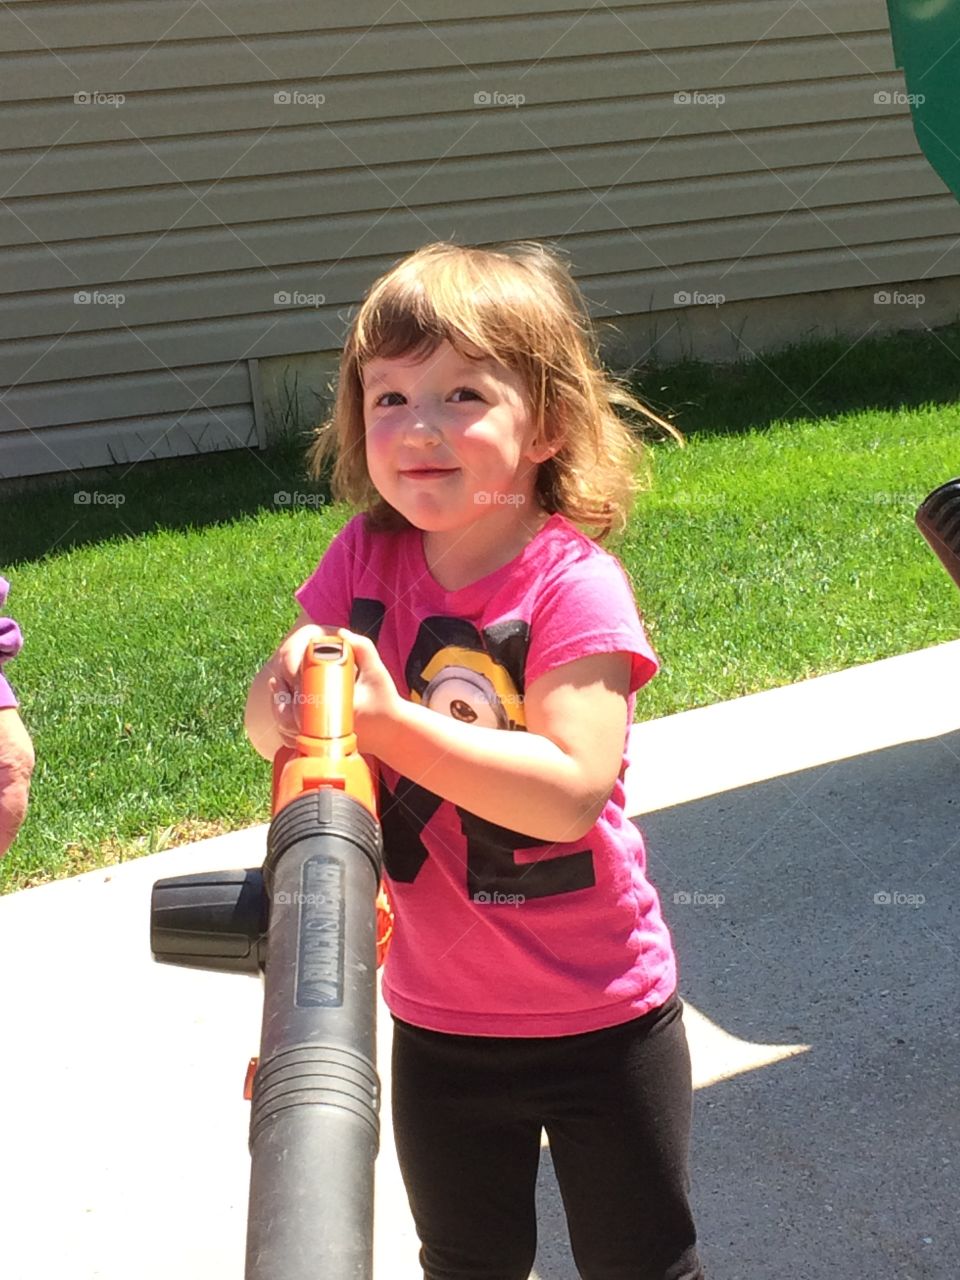 Papa' s little helper. Granddaughter helping her papa with yard work